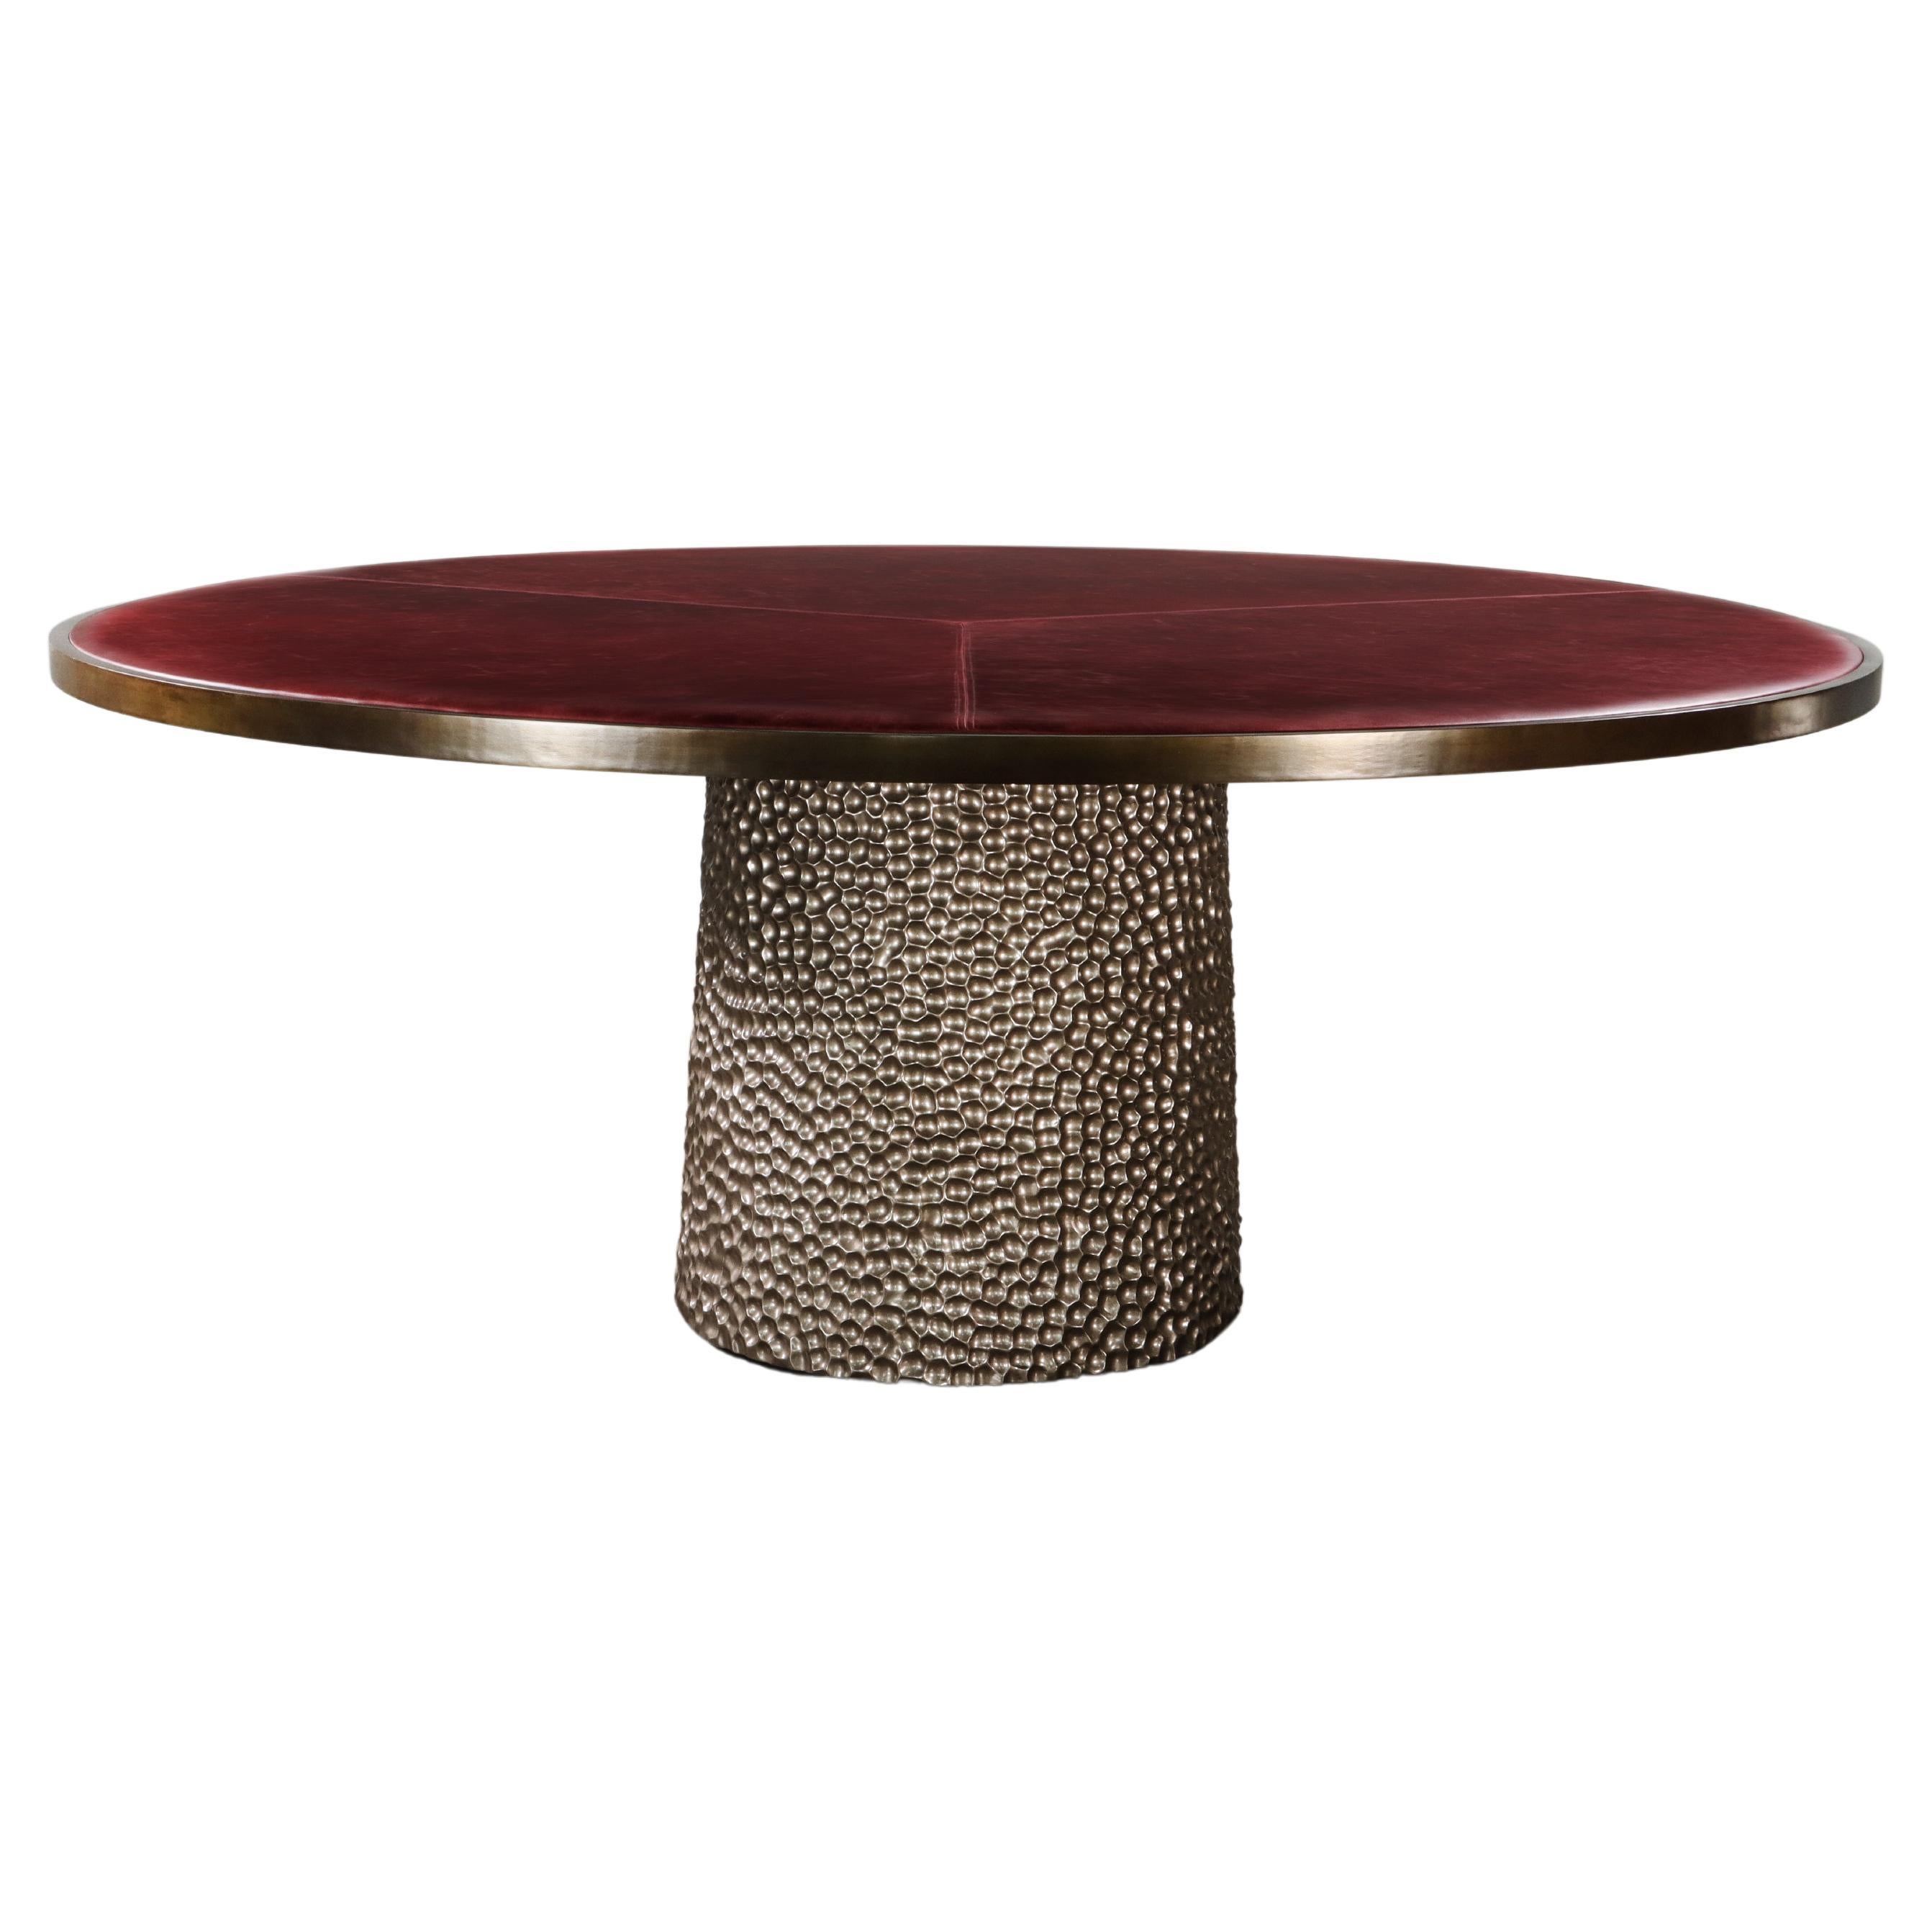 Upholstered Round Game Table with Metallic Carved Base from Costantini, Giada For Sale